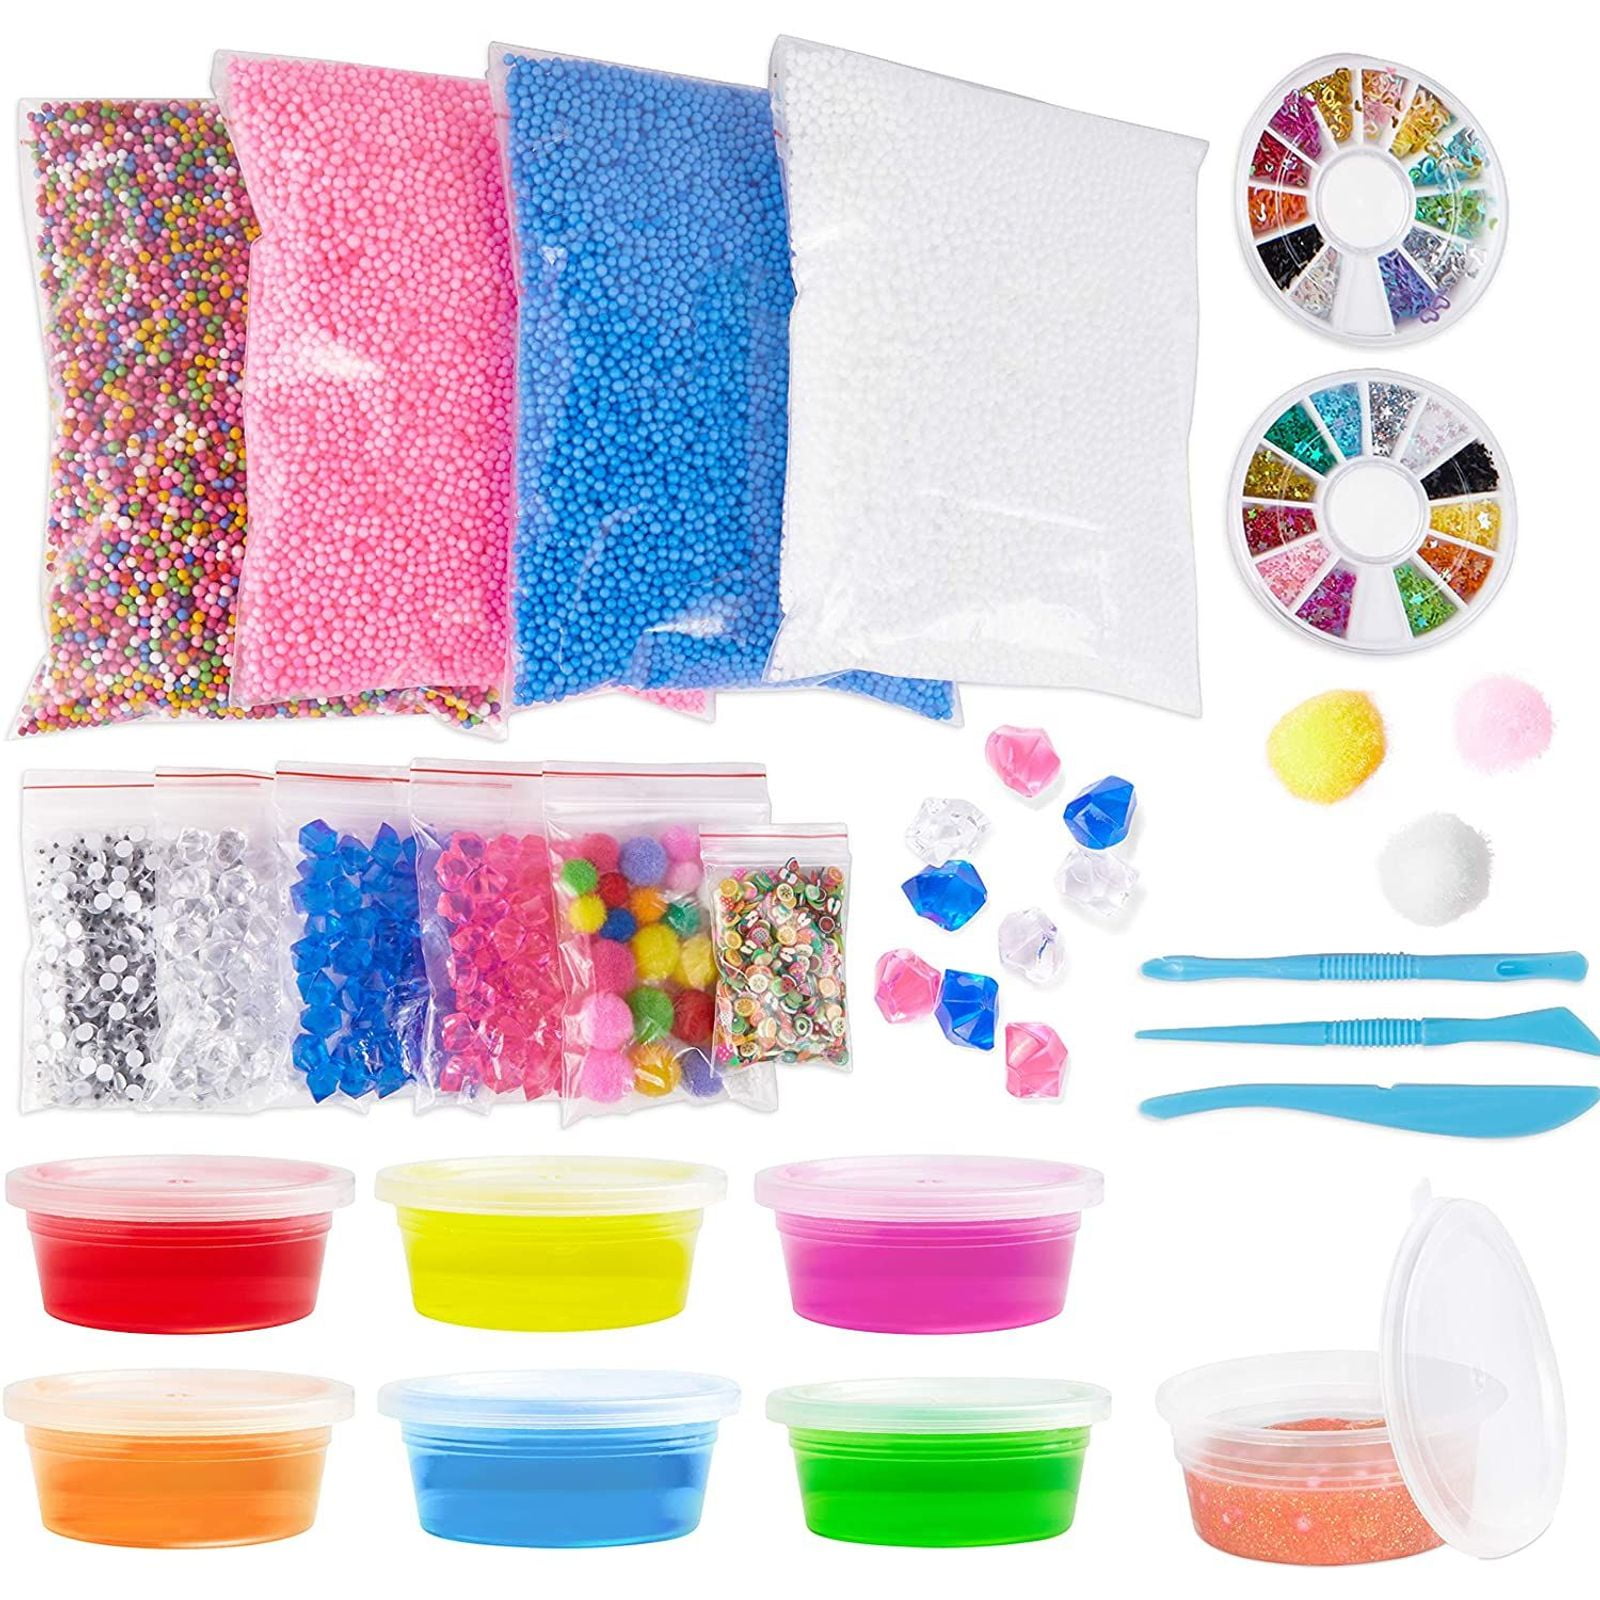 82 PC Pack Making Kits Supplies for Slime Stuff Charm Fishbowl Beads  Glitter Pearls DIY Handmade Color Foam Ball Material Set 